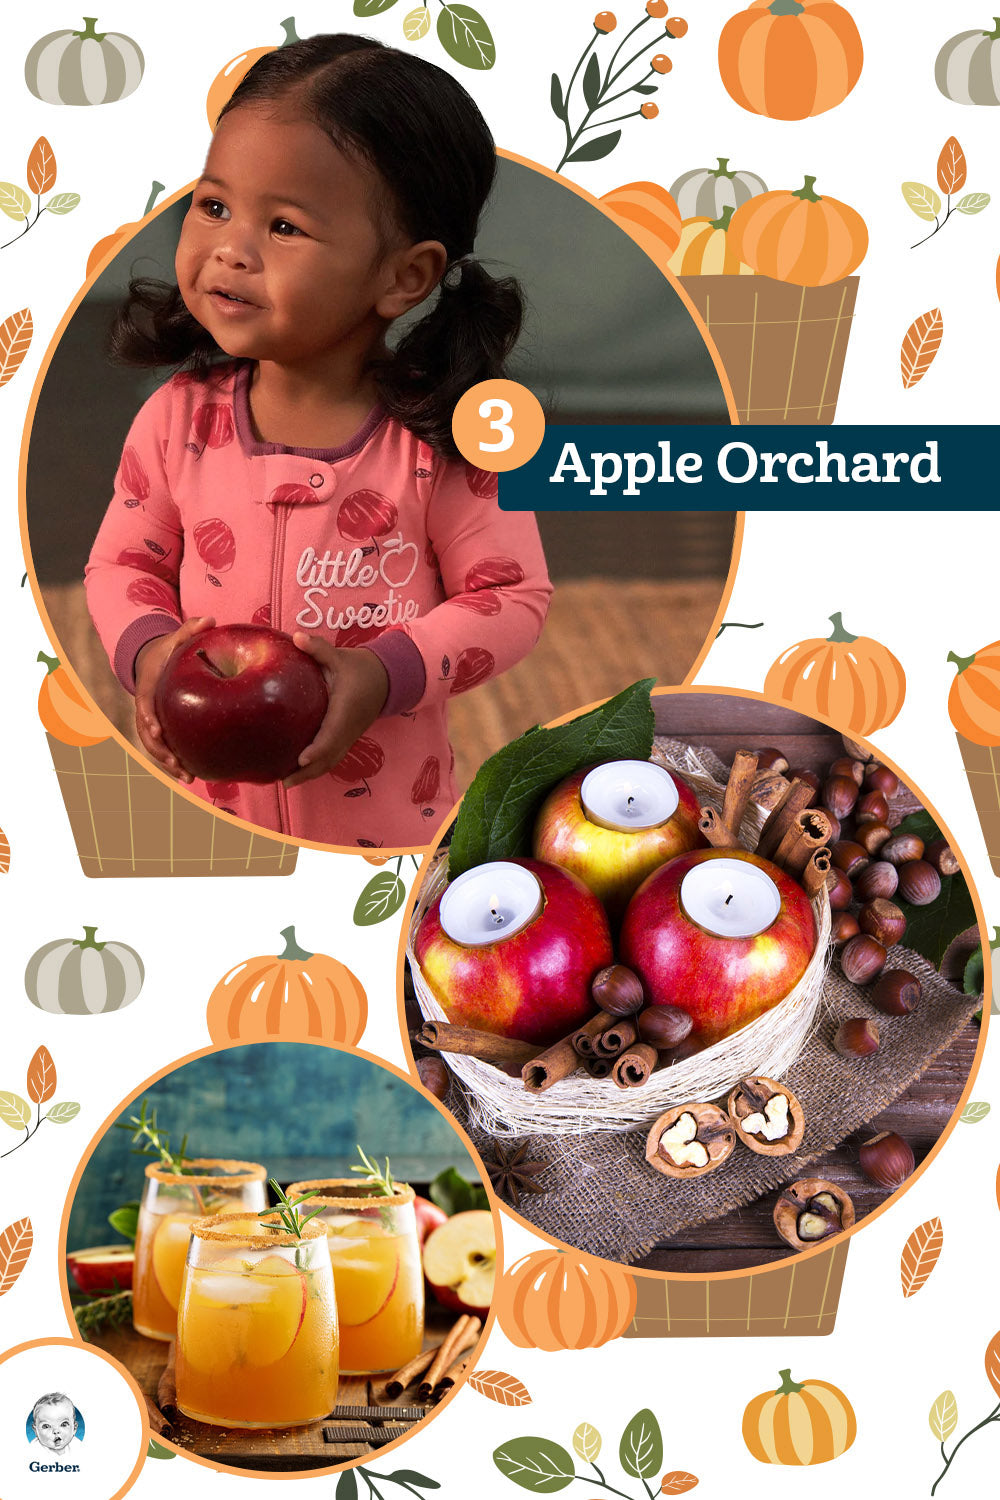 Little girl enjoying an apple orchard party with apples